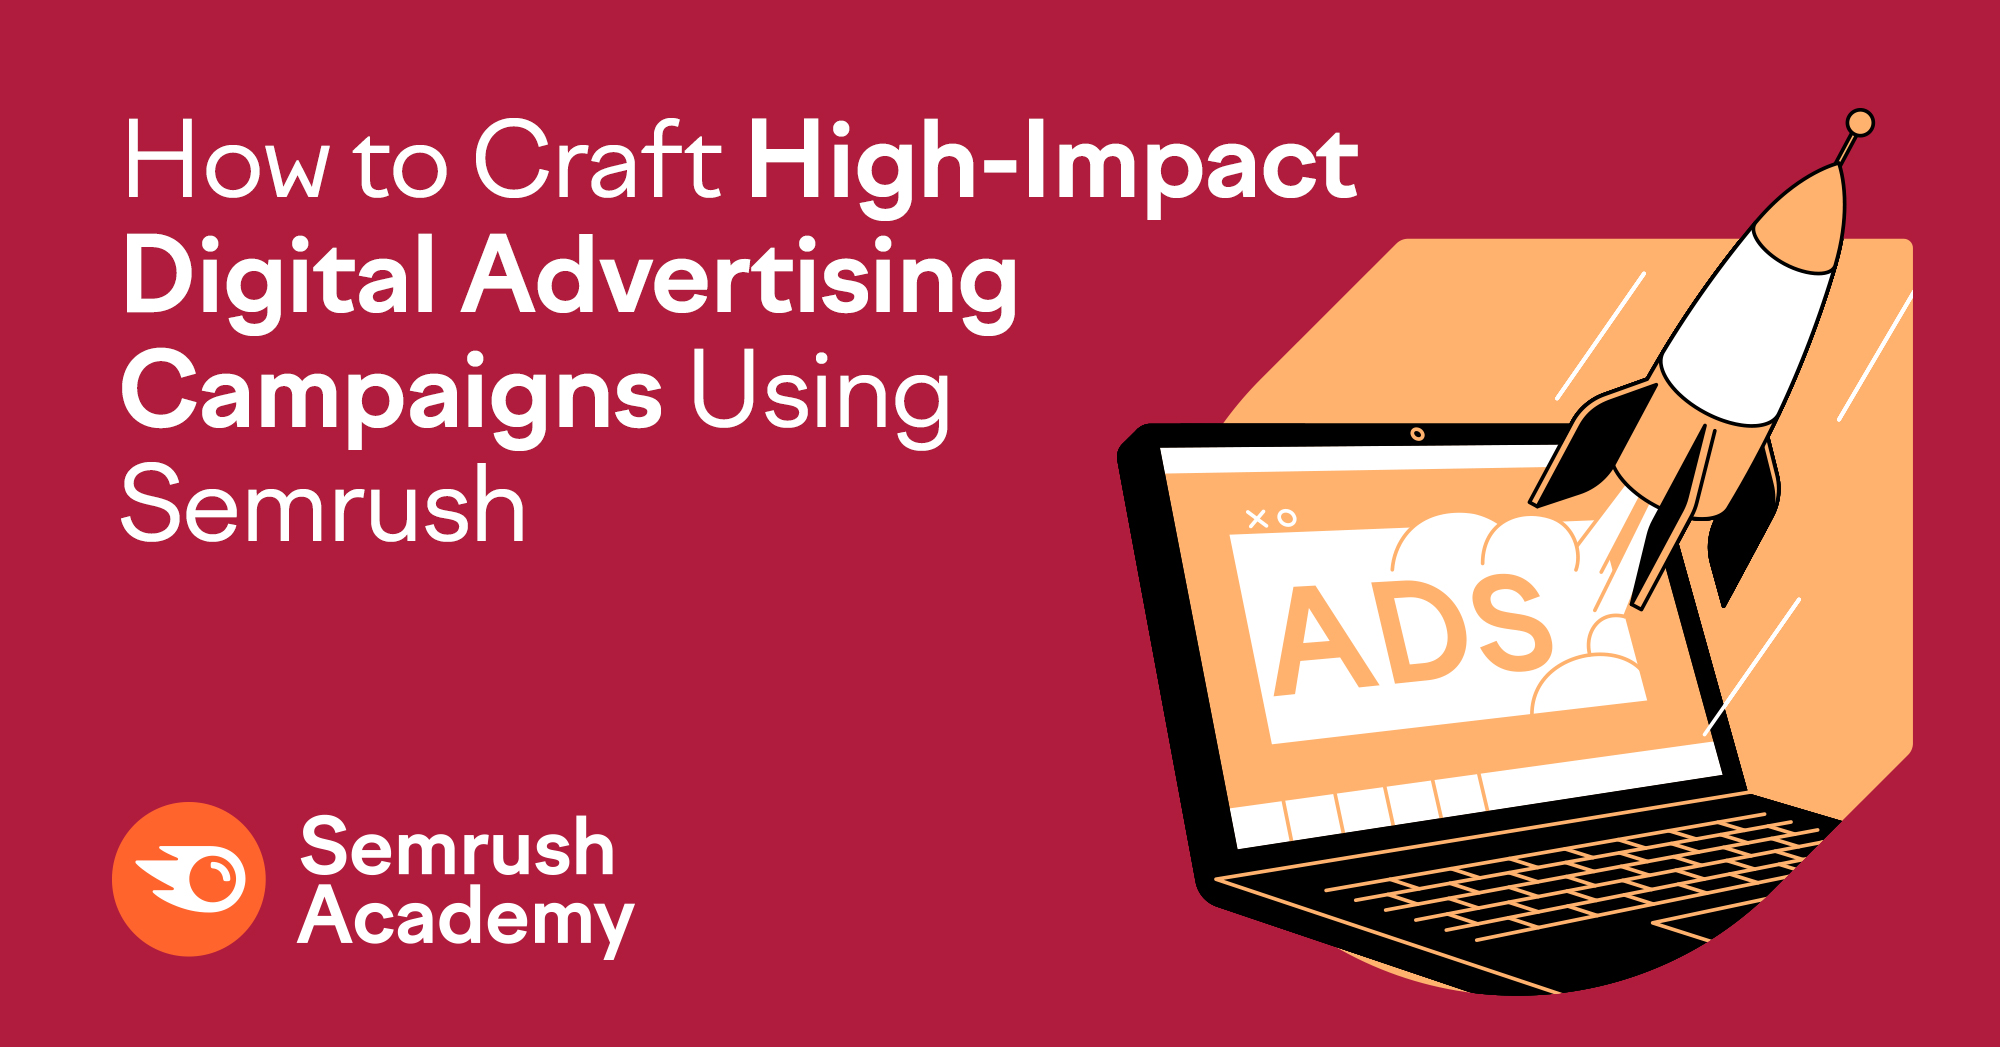 How to Create Digital Advertising Campaigns